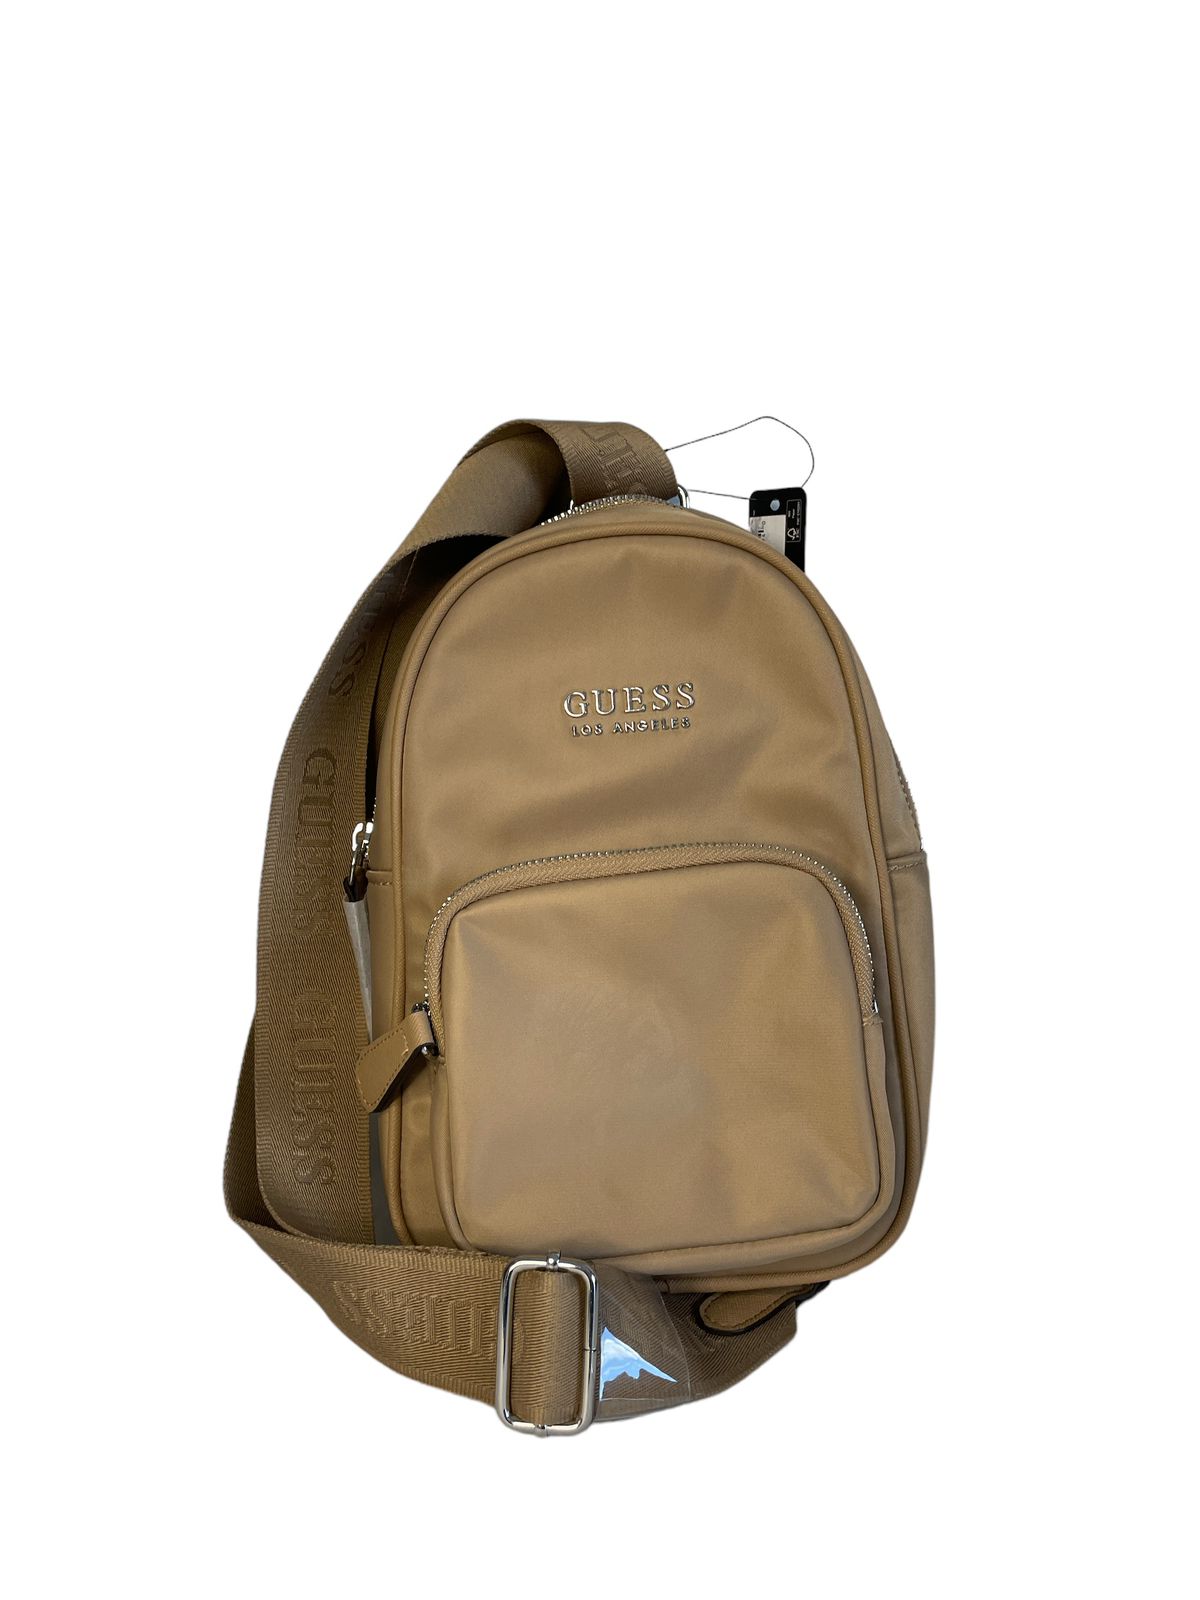 MOCHILA GUESS LOS ANGELES  CAFE  BACKPACK